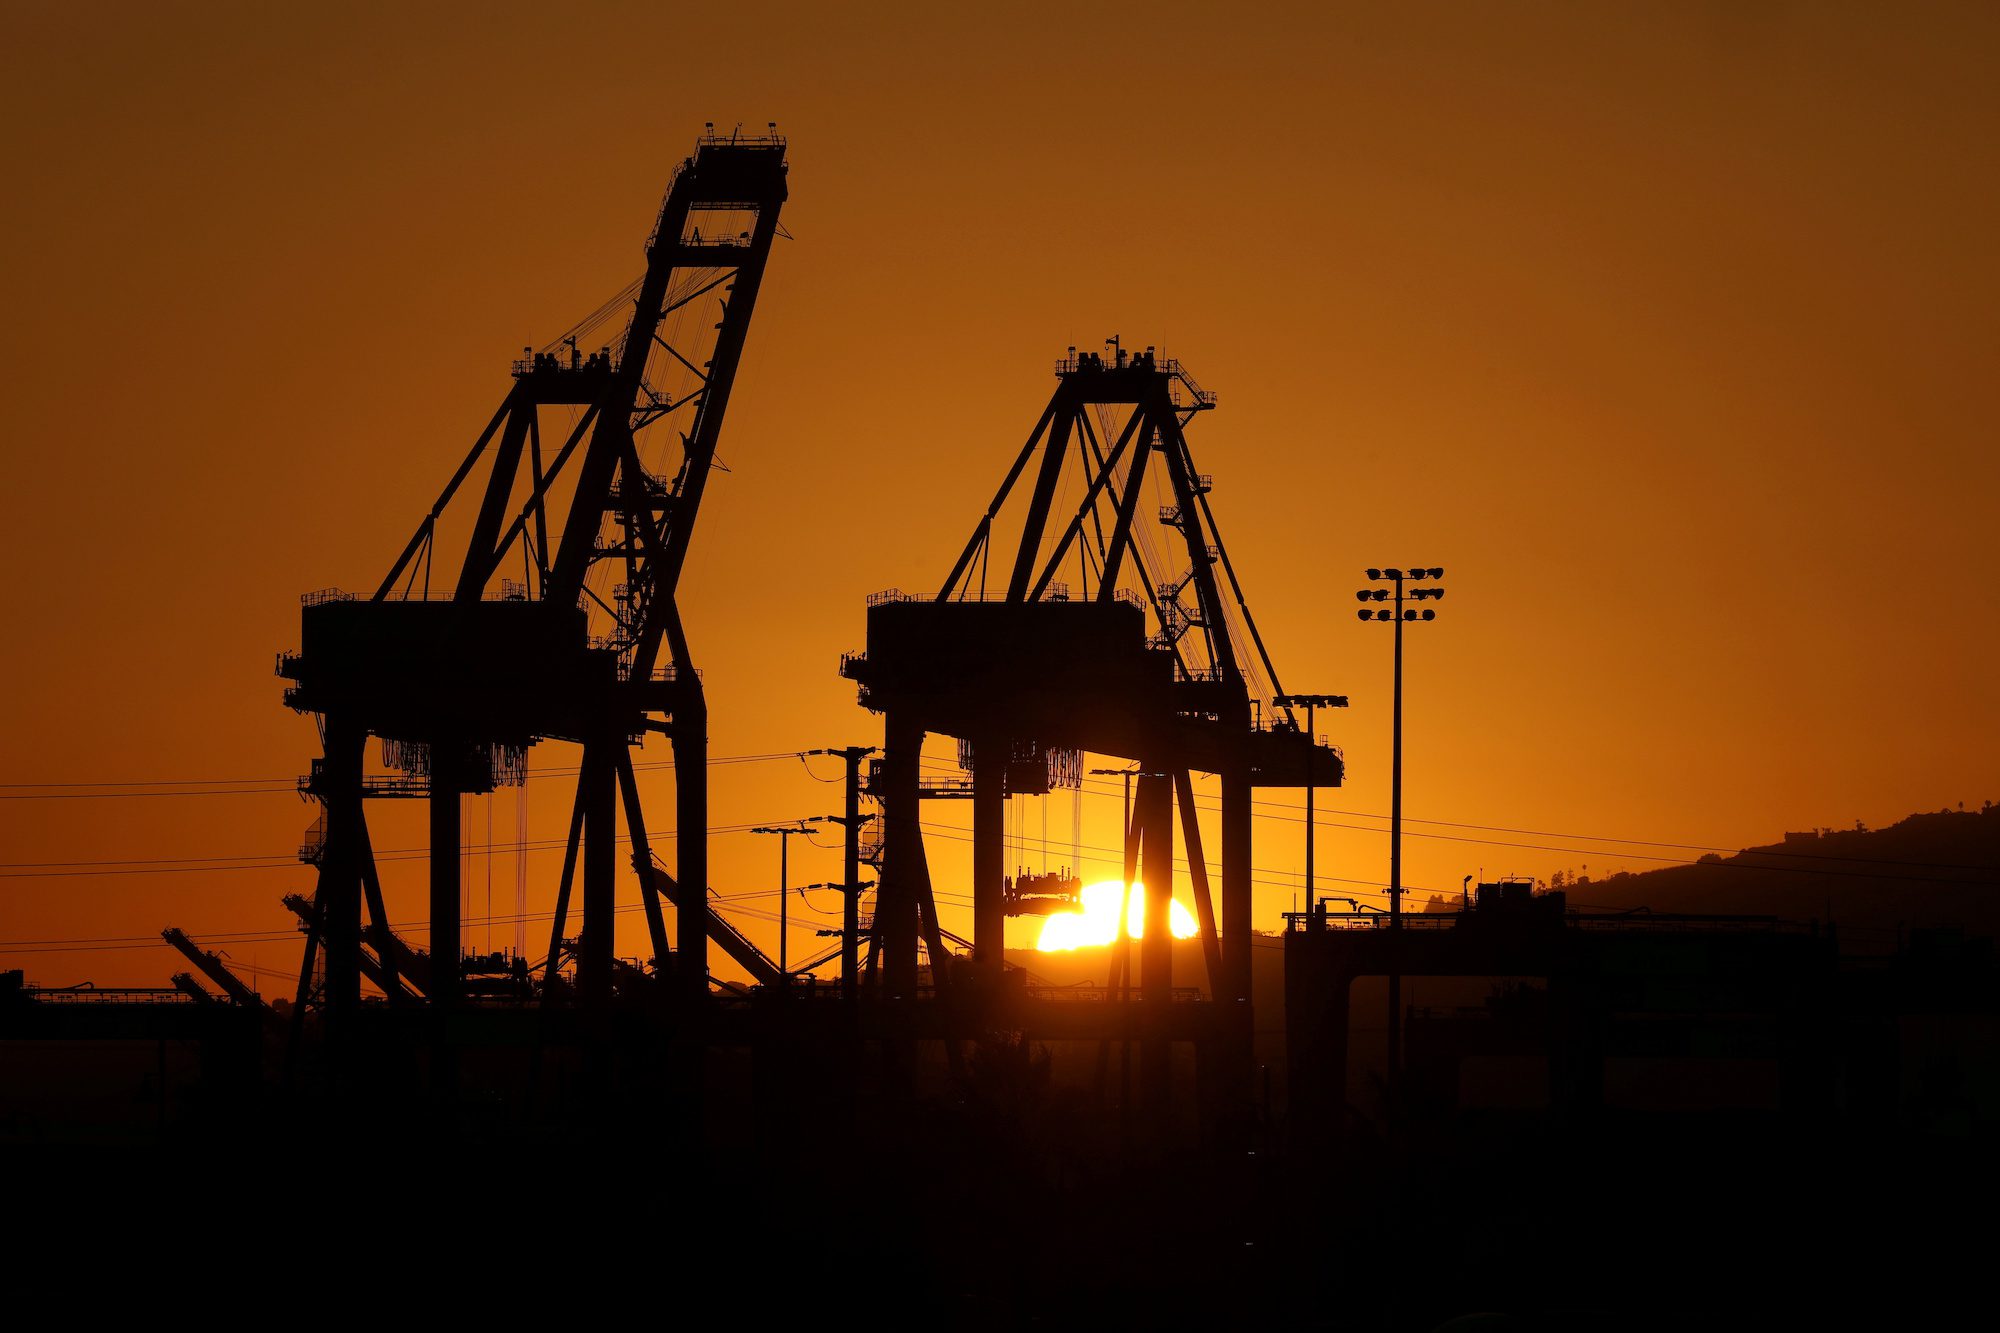 Narrow Window to Clear Congested Southern California Ports Hinges on Demand Waning